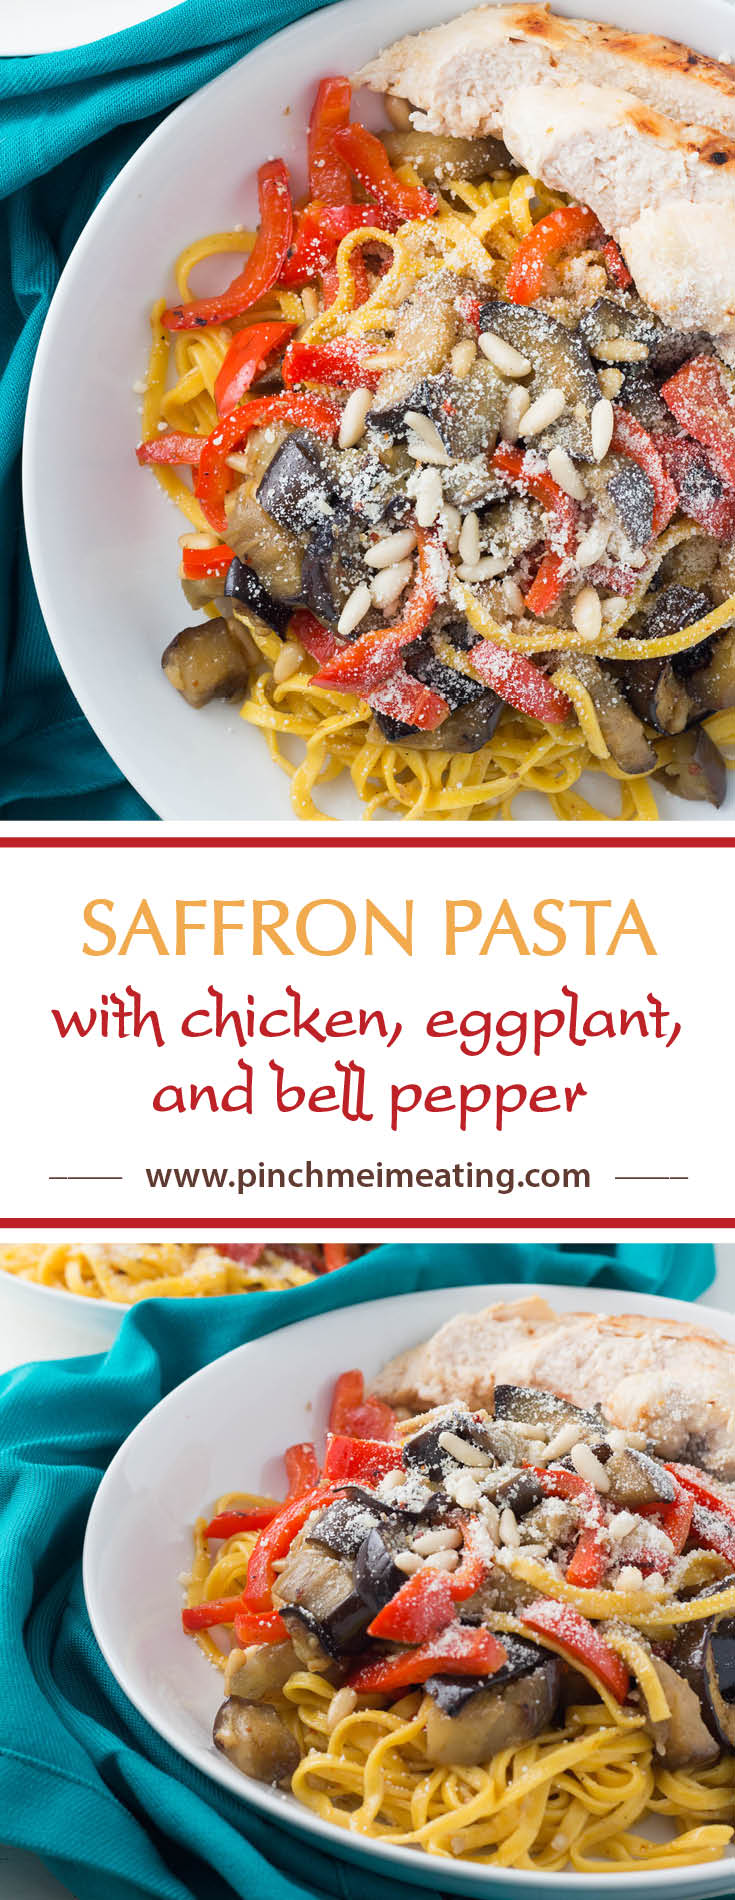 Saffron pasta with eggplant, chicken, bell pepper, and pine nuts may look fancy, but it comes together very easily for a simple weeknight dinner!